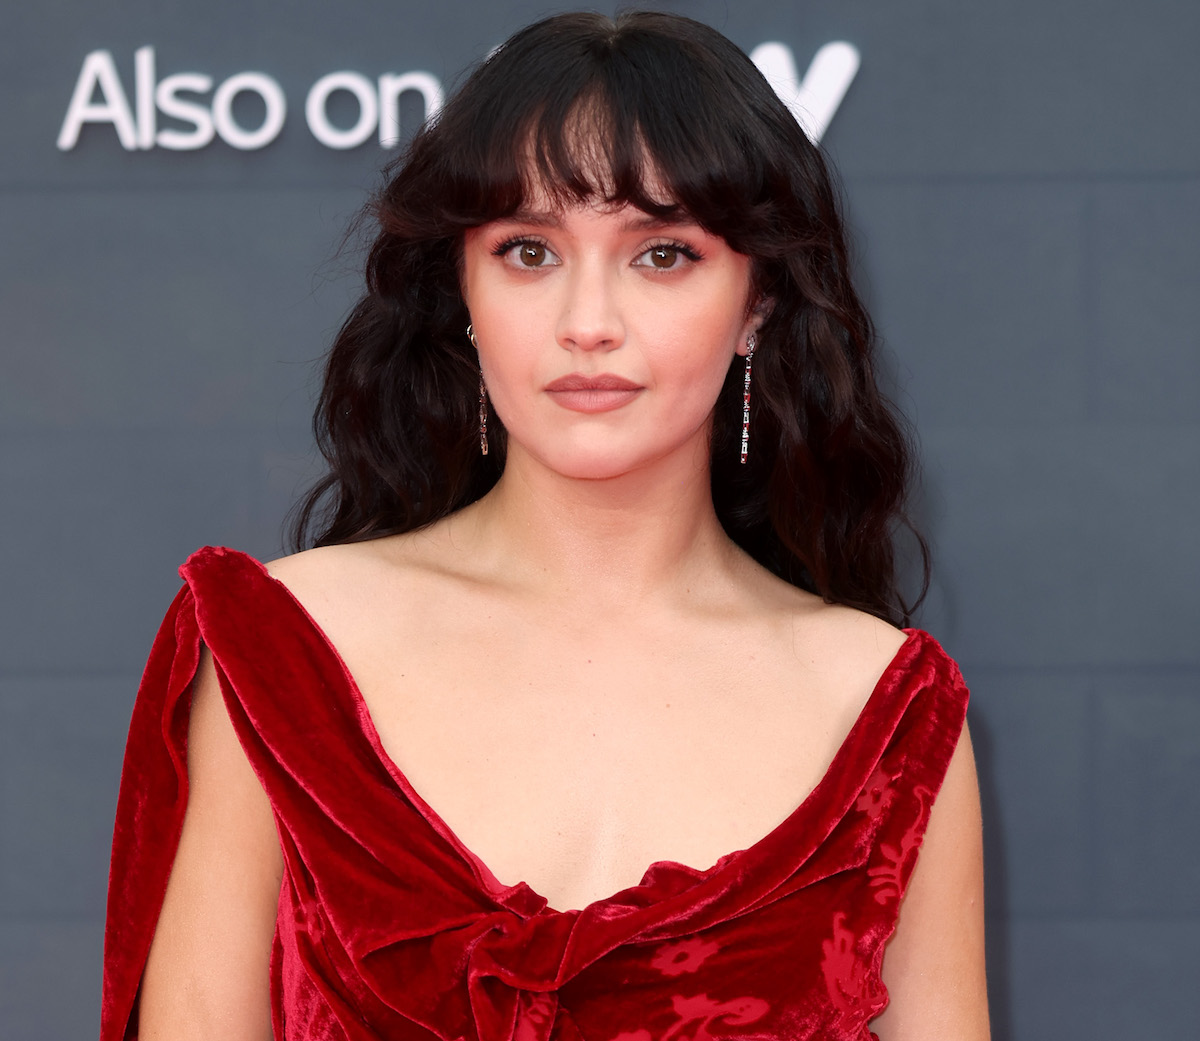 cynthia pablo recommends bathing suit olivia cooke pic